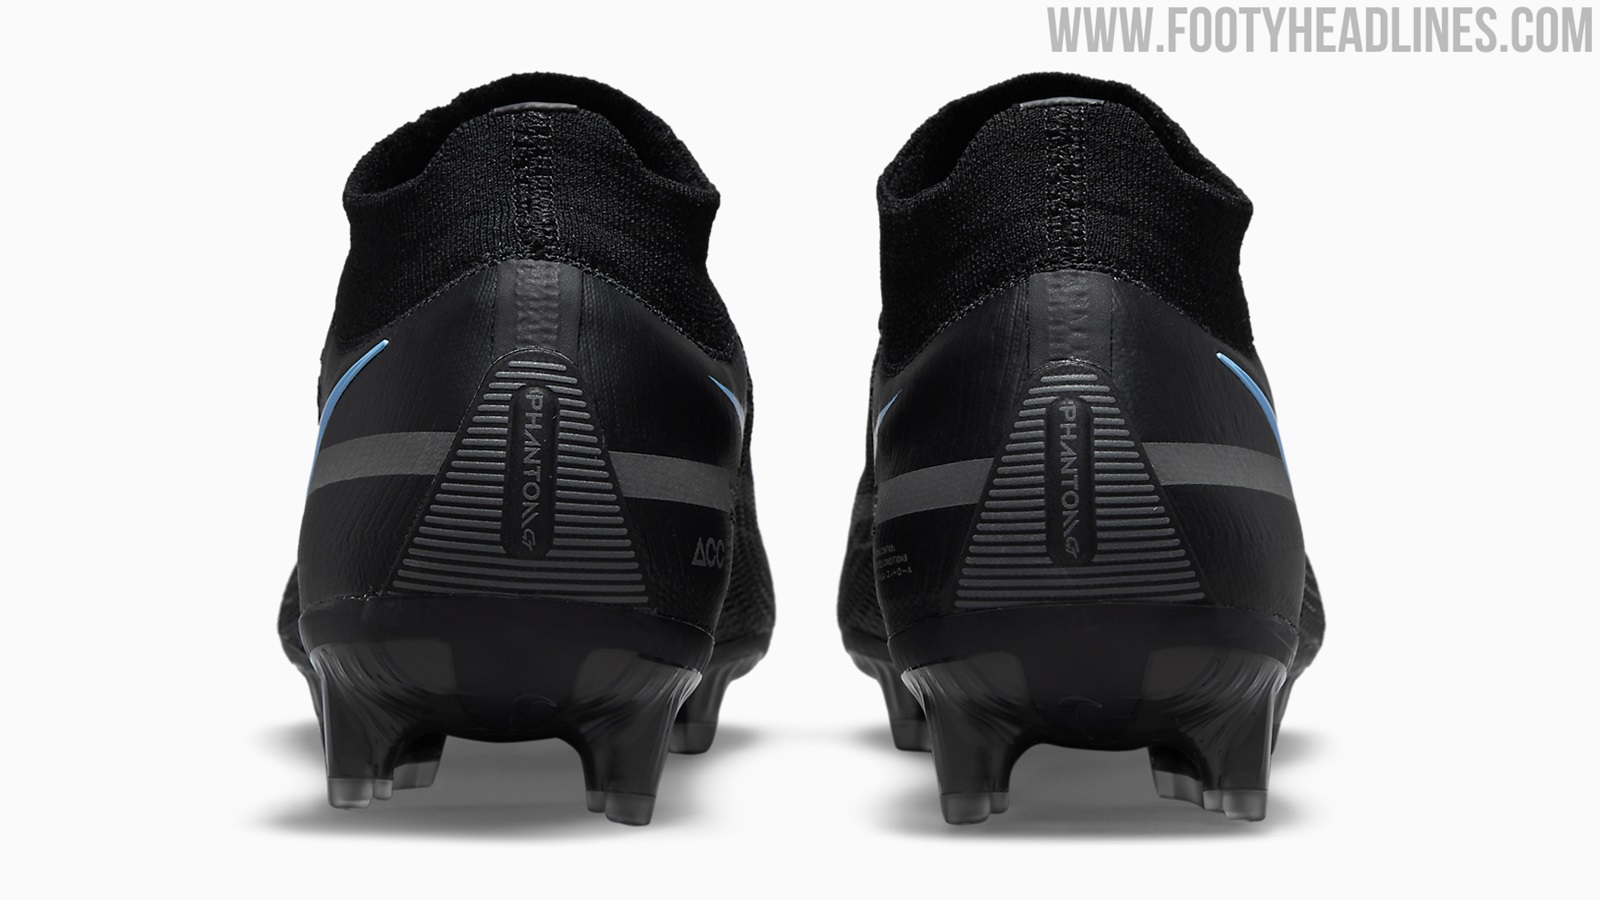 Nike 2021-22 Black Pack Boots Collection Released - Next-Gen Phantom ...